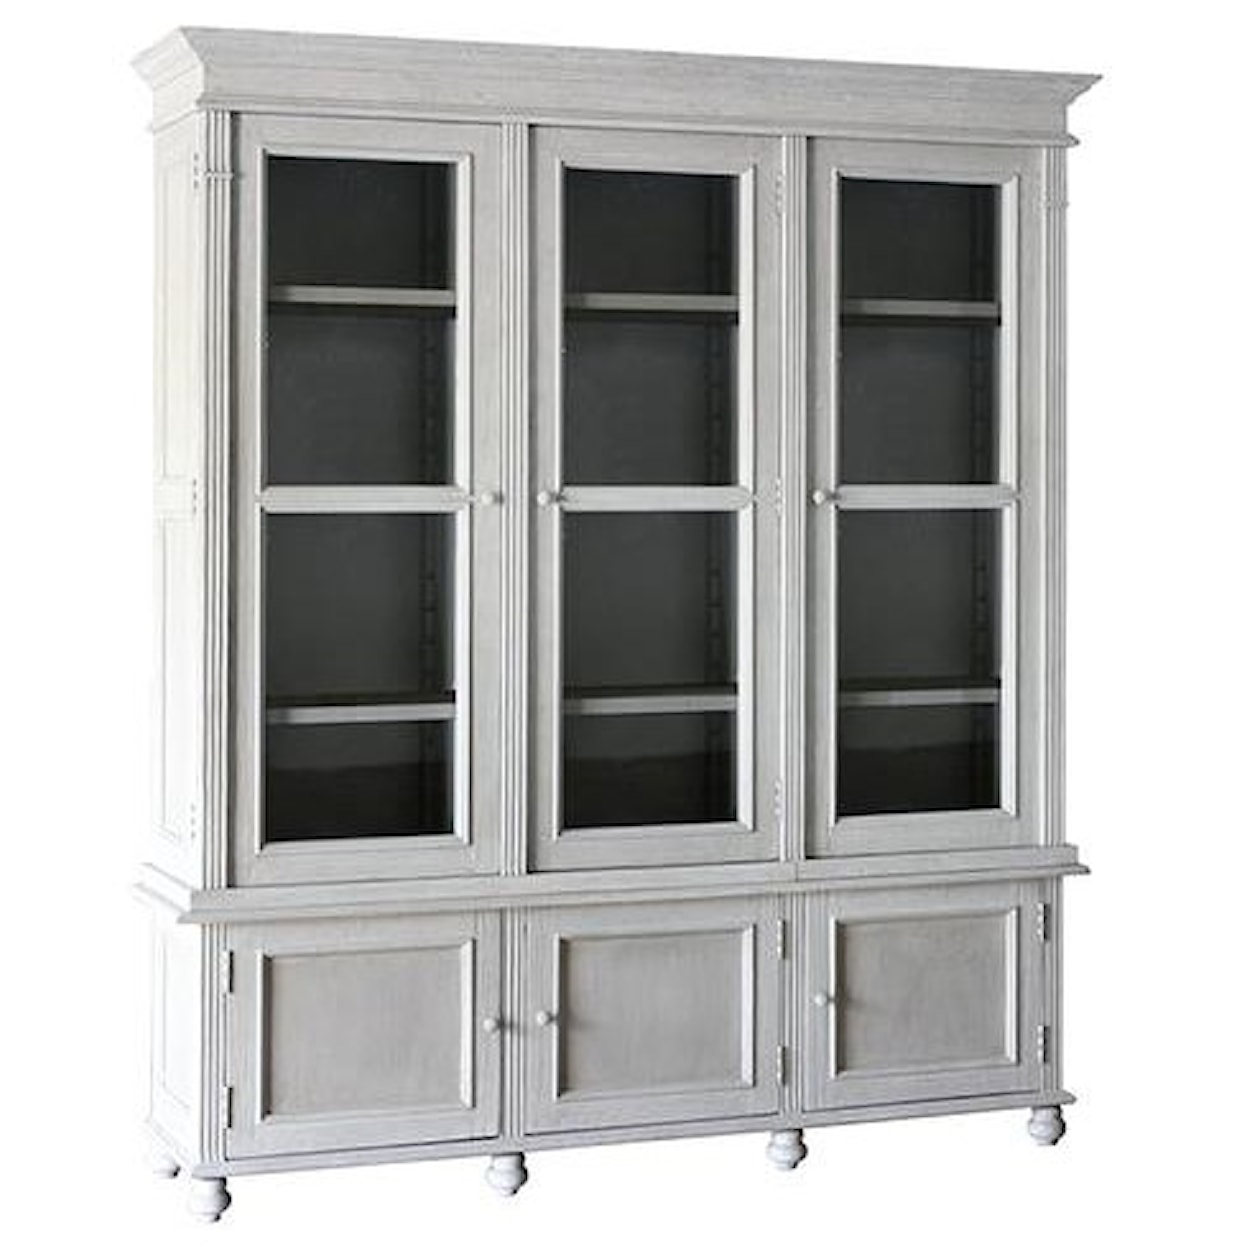 Dovetail Furniture Cabinets Collis Cabinet